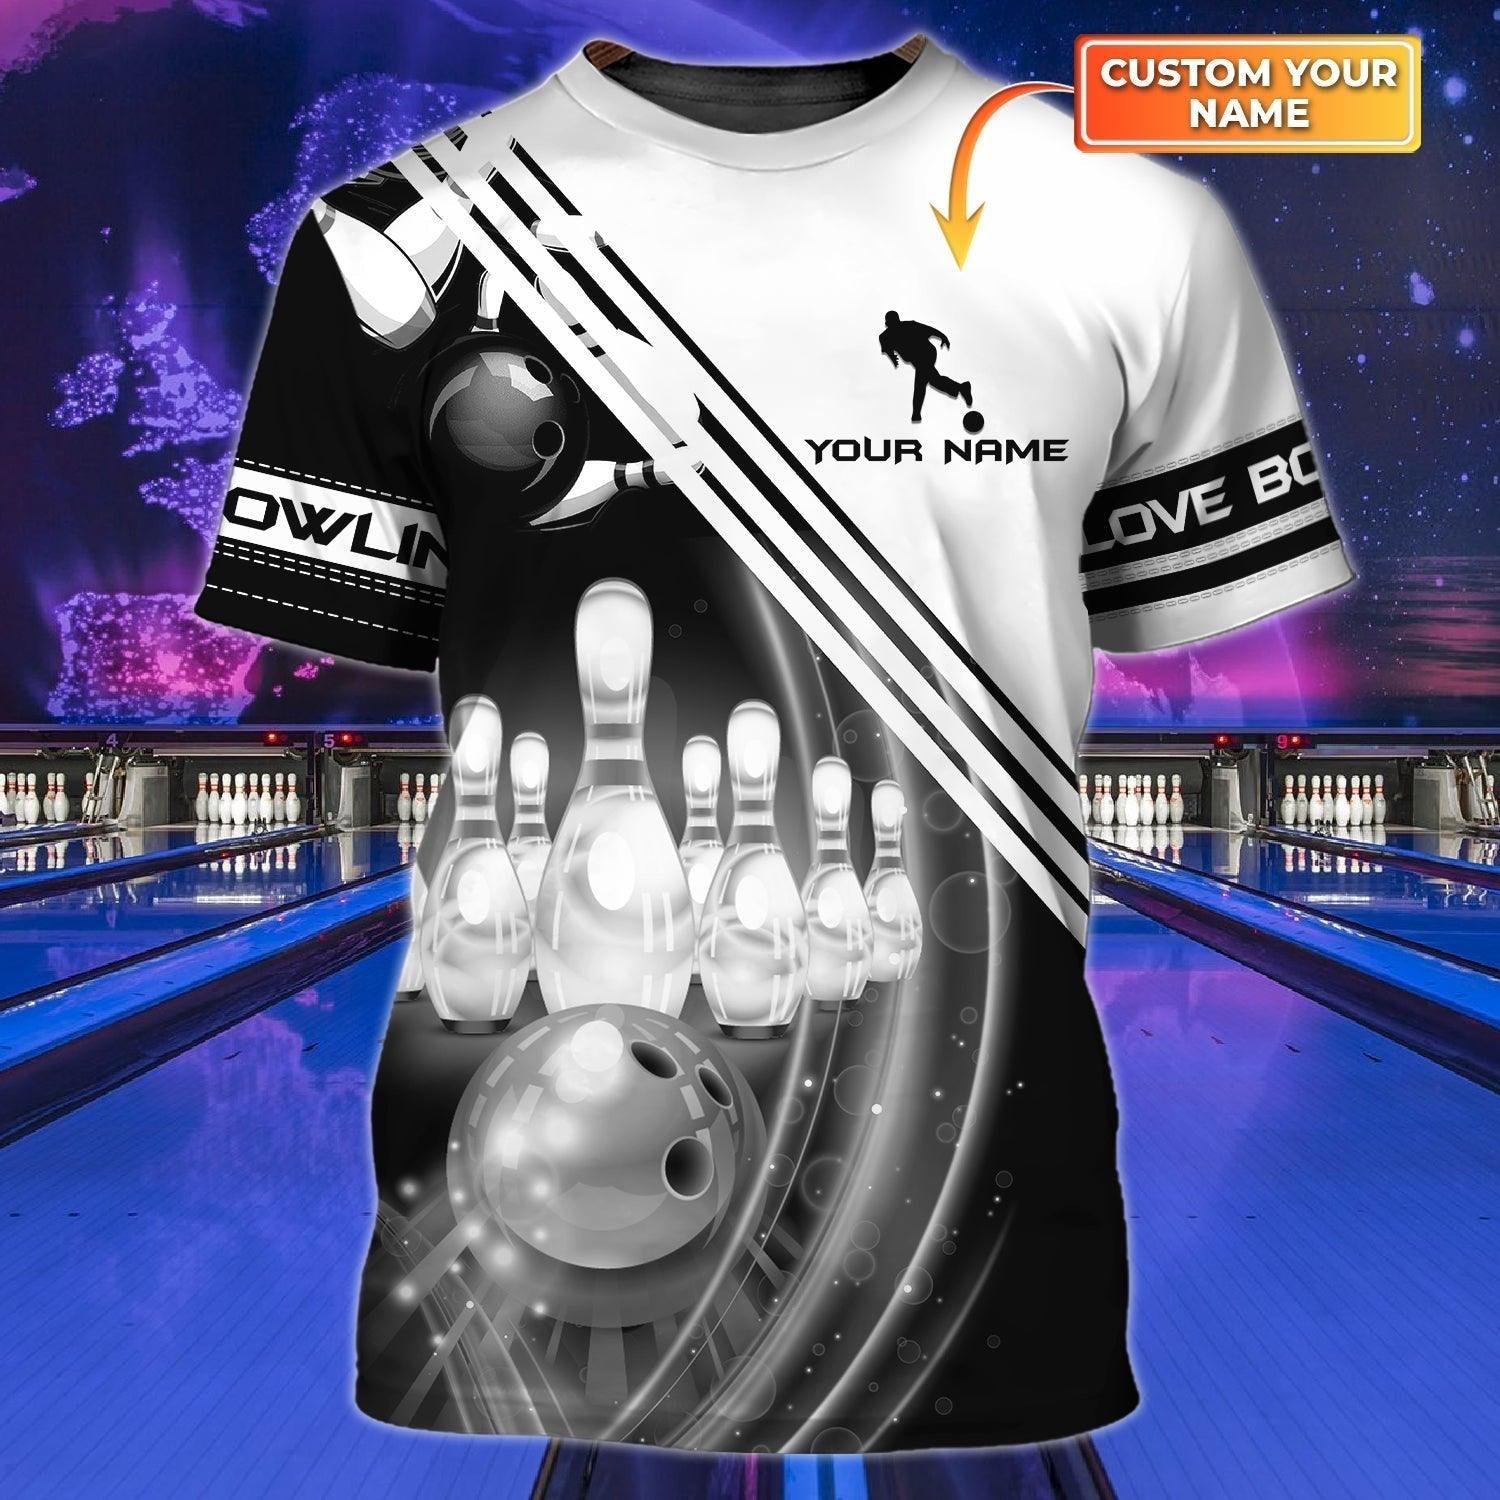 Customized Name Black And White Bowling Shirt, Personalized Bowling Team Players Shirt For Men - Perfect Gift For Bowling Lovers, Bowlers - Amzanimalsgift